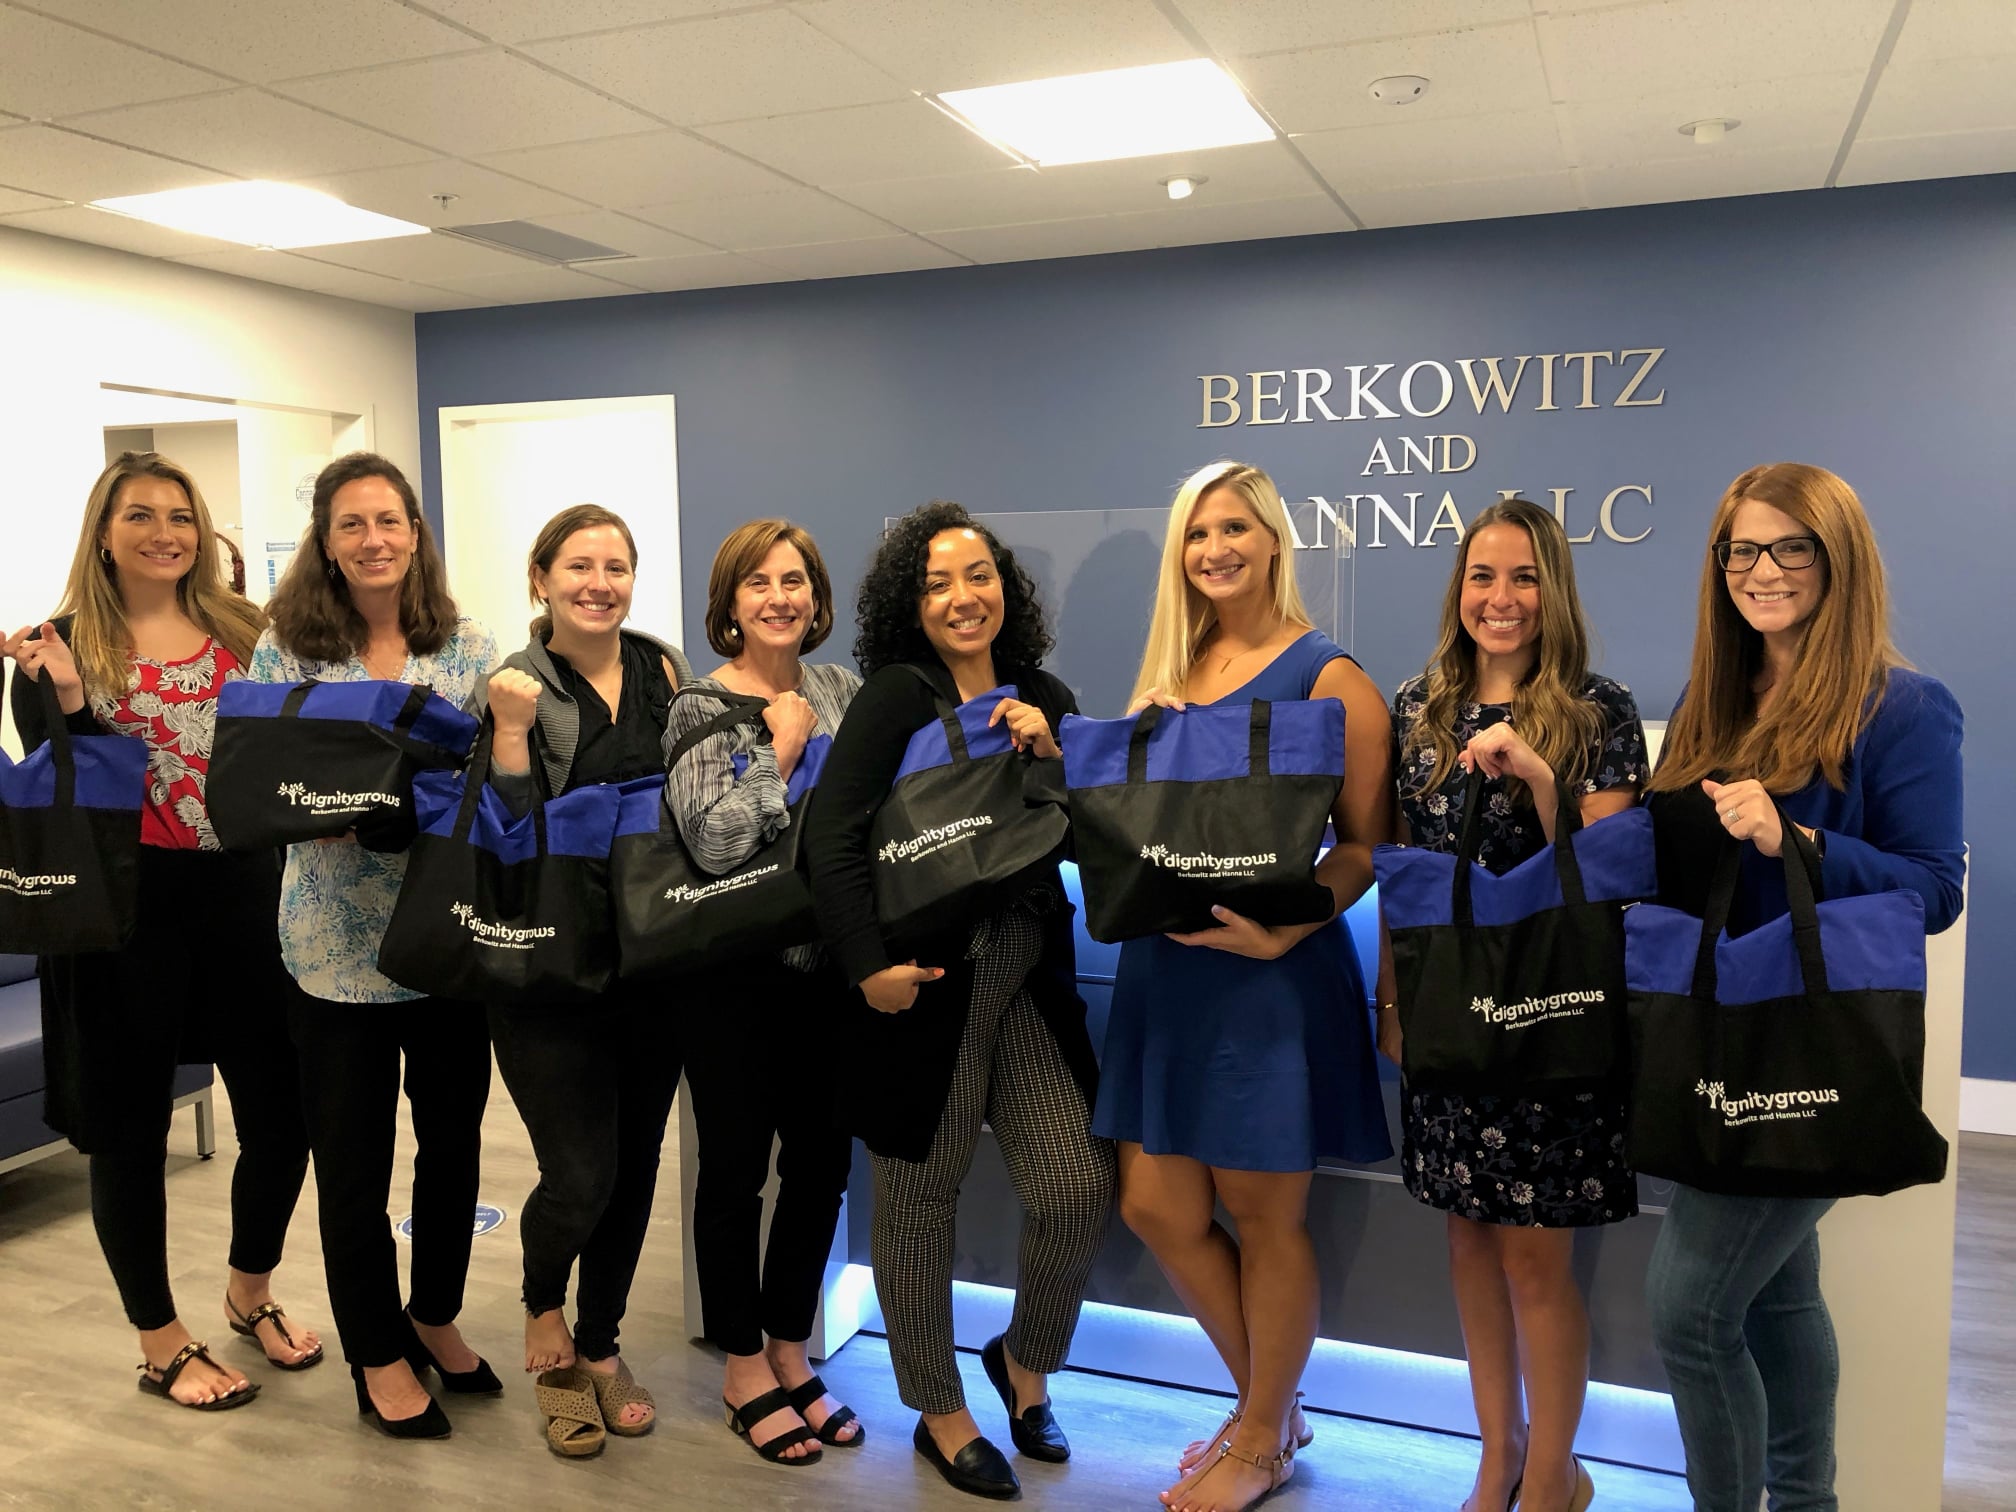 Berkowitz and Hanna Charitable Fund and Dignity Grows Selects Building One Community as Recipient of Latest Grant